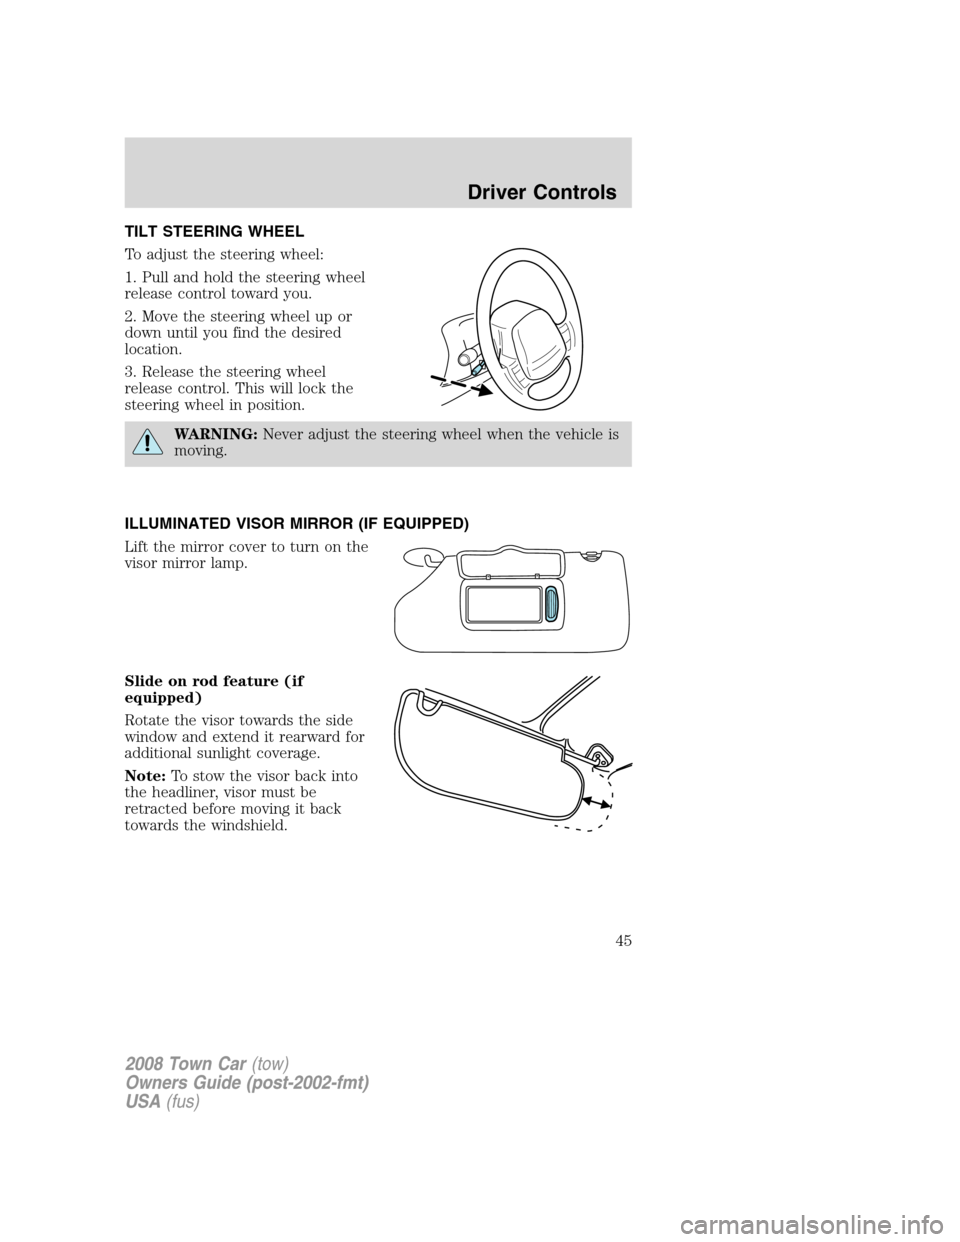 LINCOLN TOWN CAR 2008 Service Manual TILT STEERING WHEEL
To adjust the steering wheel:
1. Pull and hold the steering wheel
release control toward you.
2. Move the steering wheel up or
down until you find the desired
location.
3. Release 